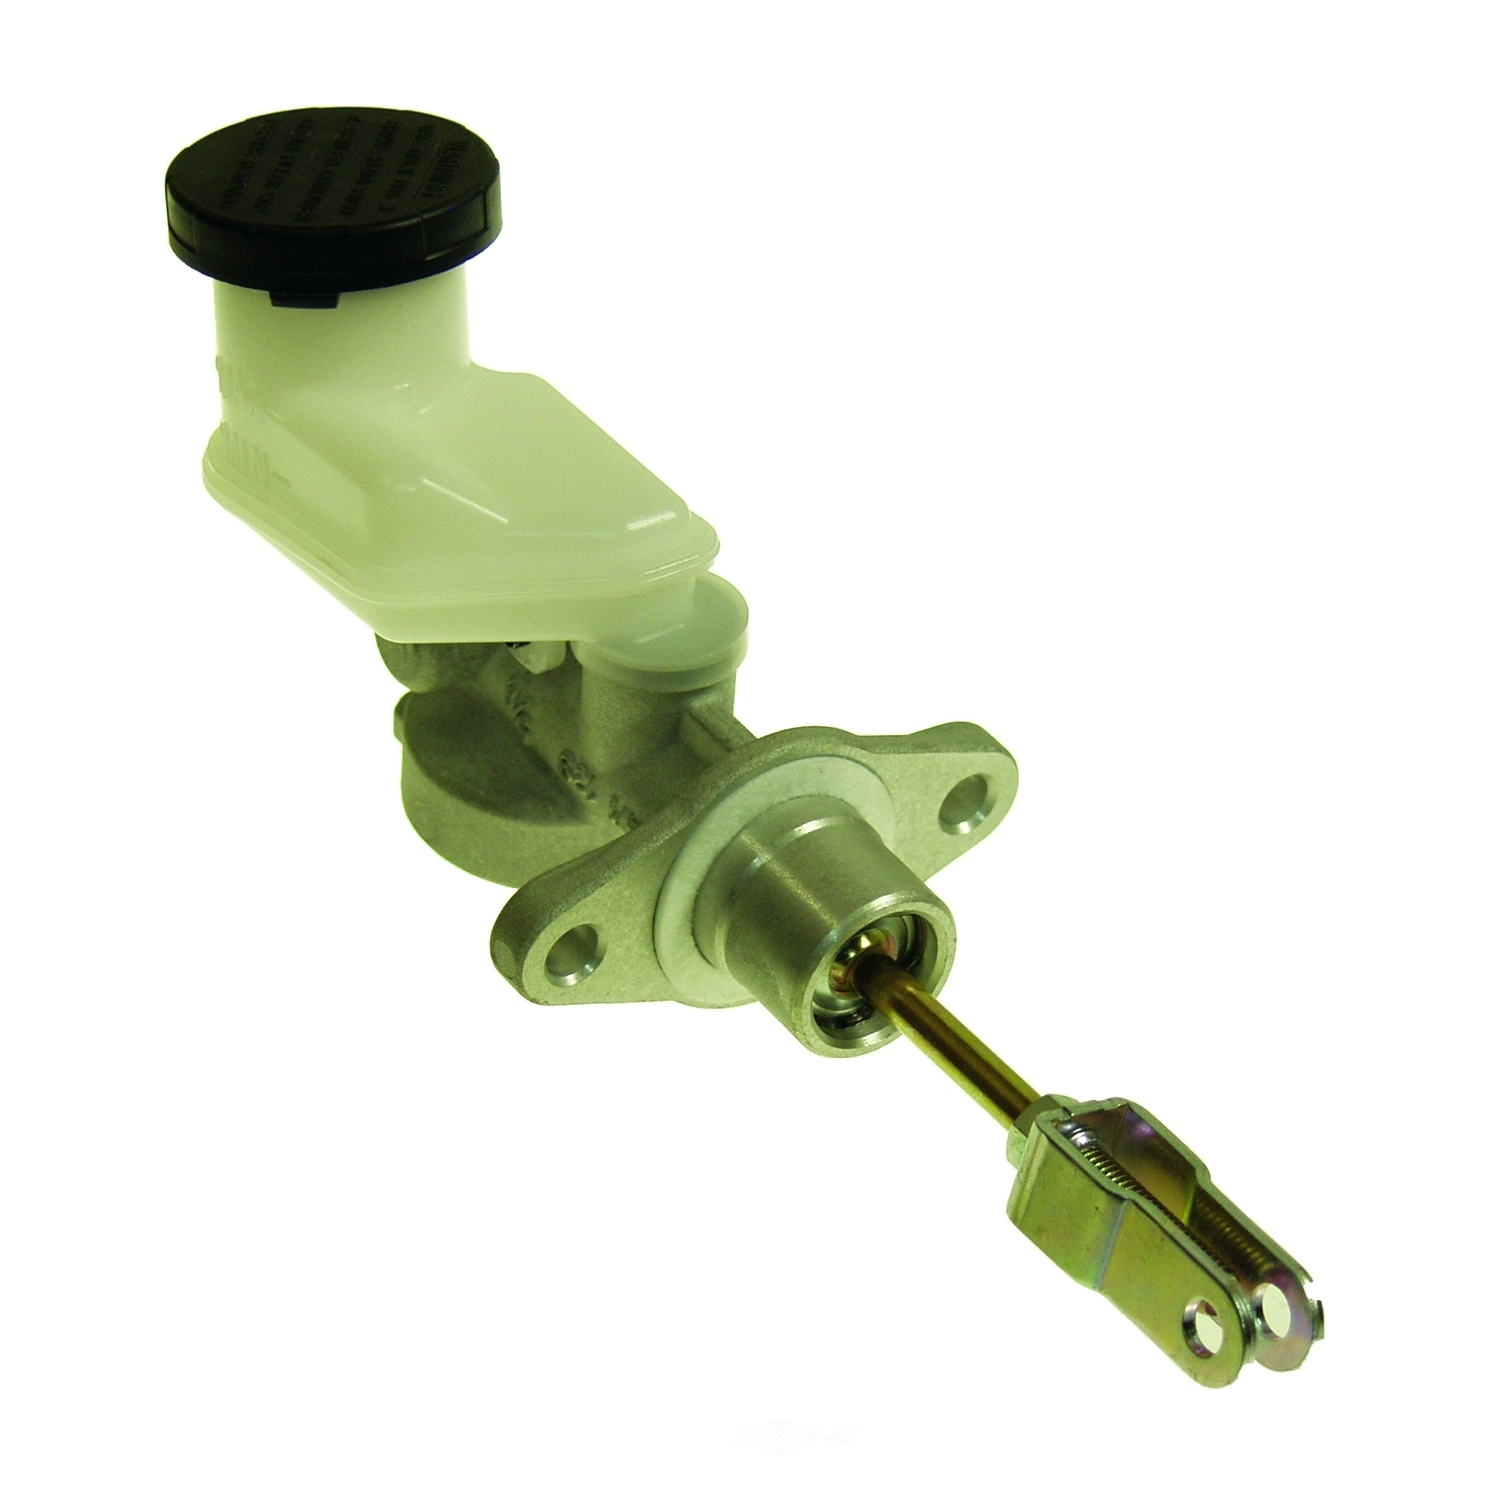 PERFECTION CLUTCH - Clutch Master Cylinder - PHT 800127